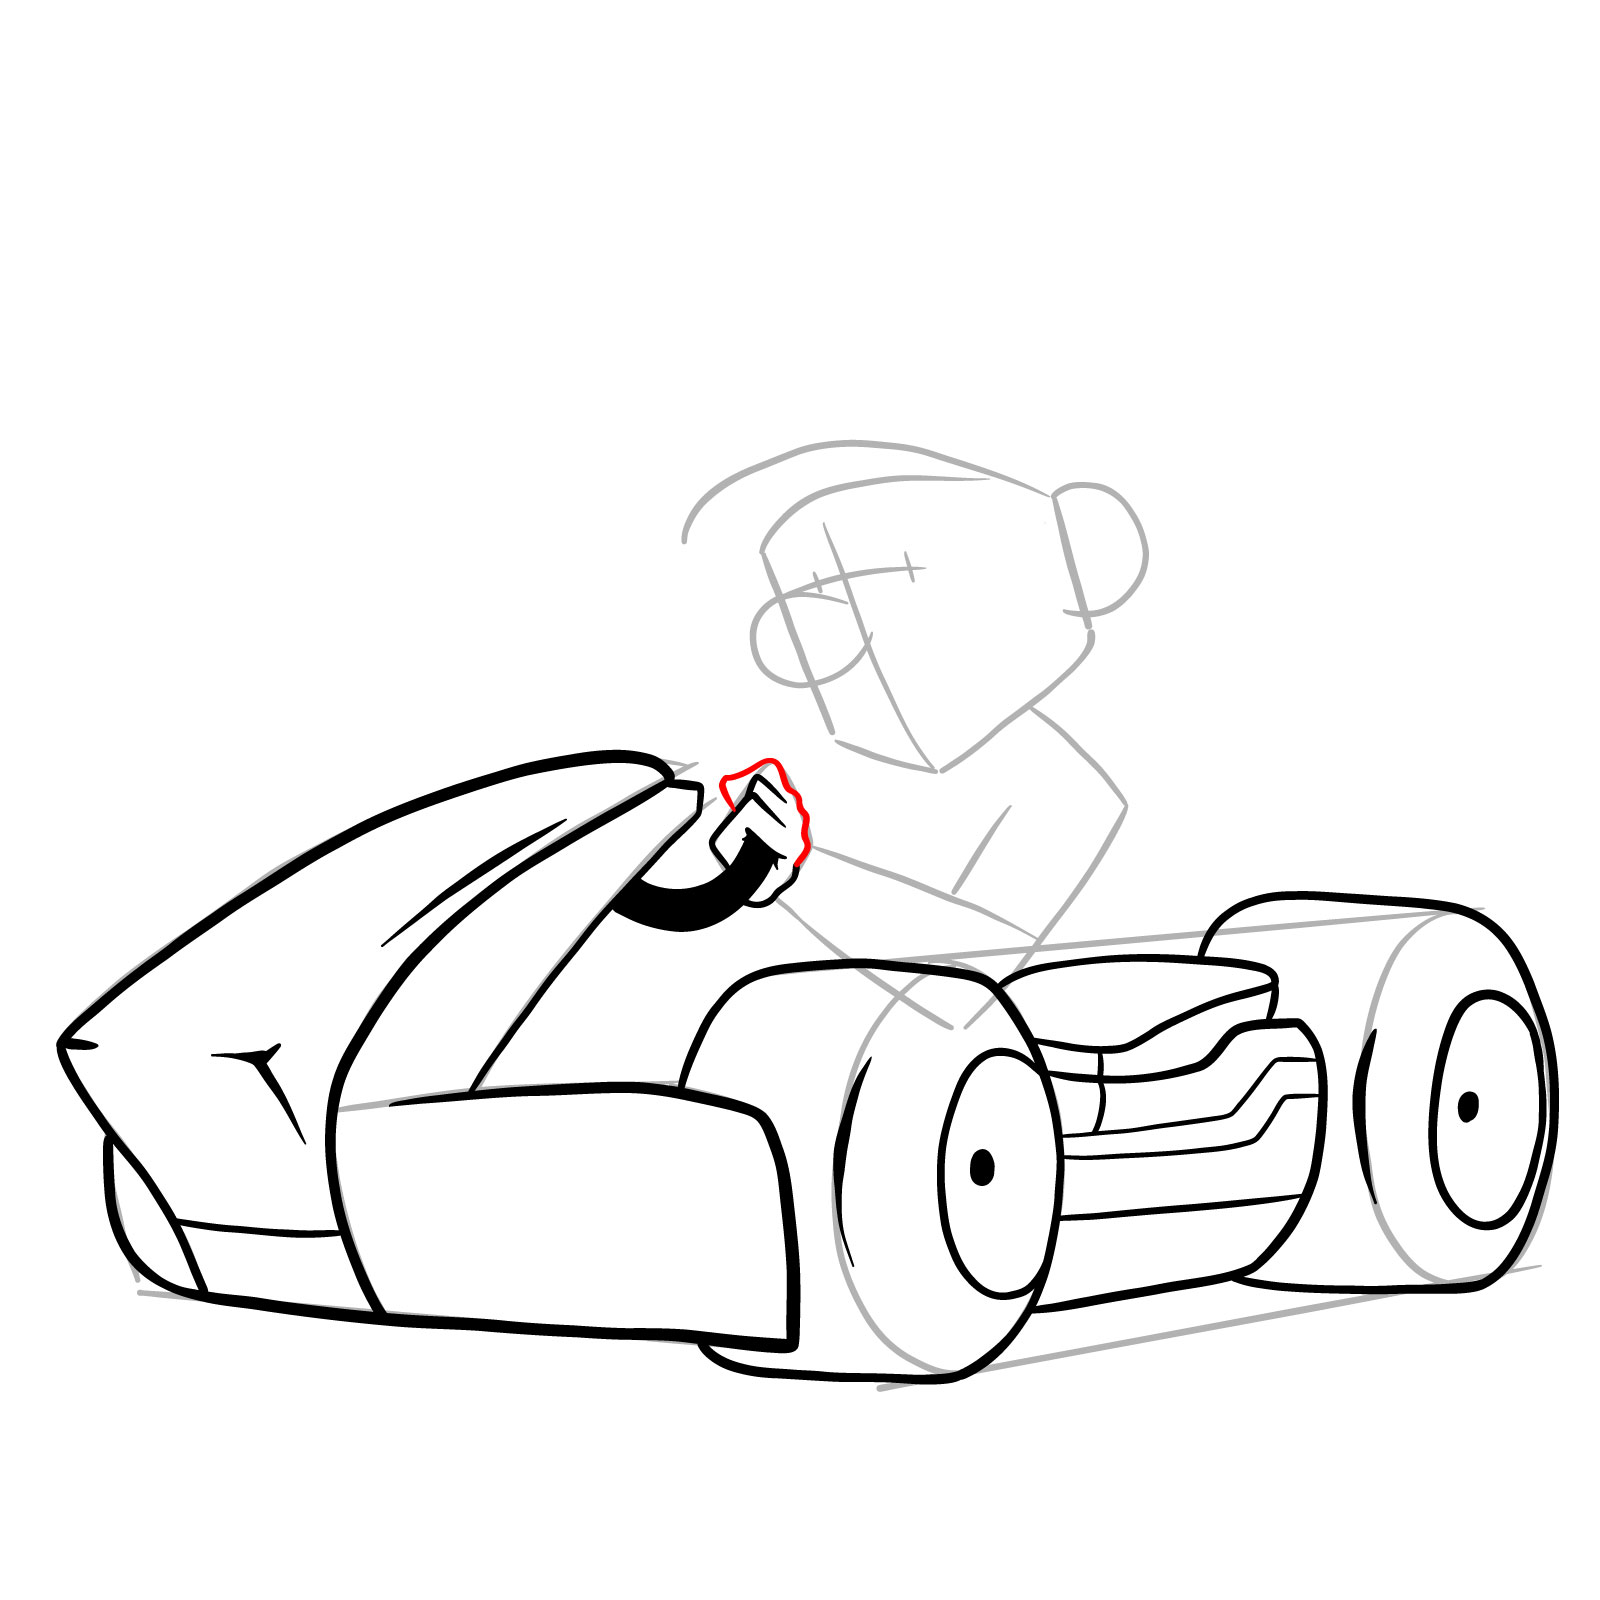 How to draw Race Traitors Mario - step 17